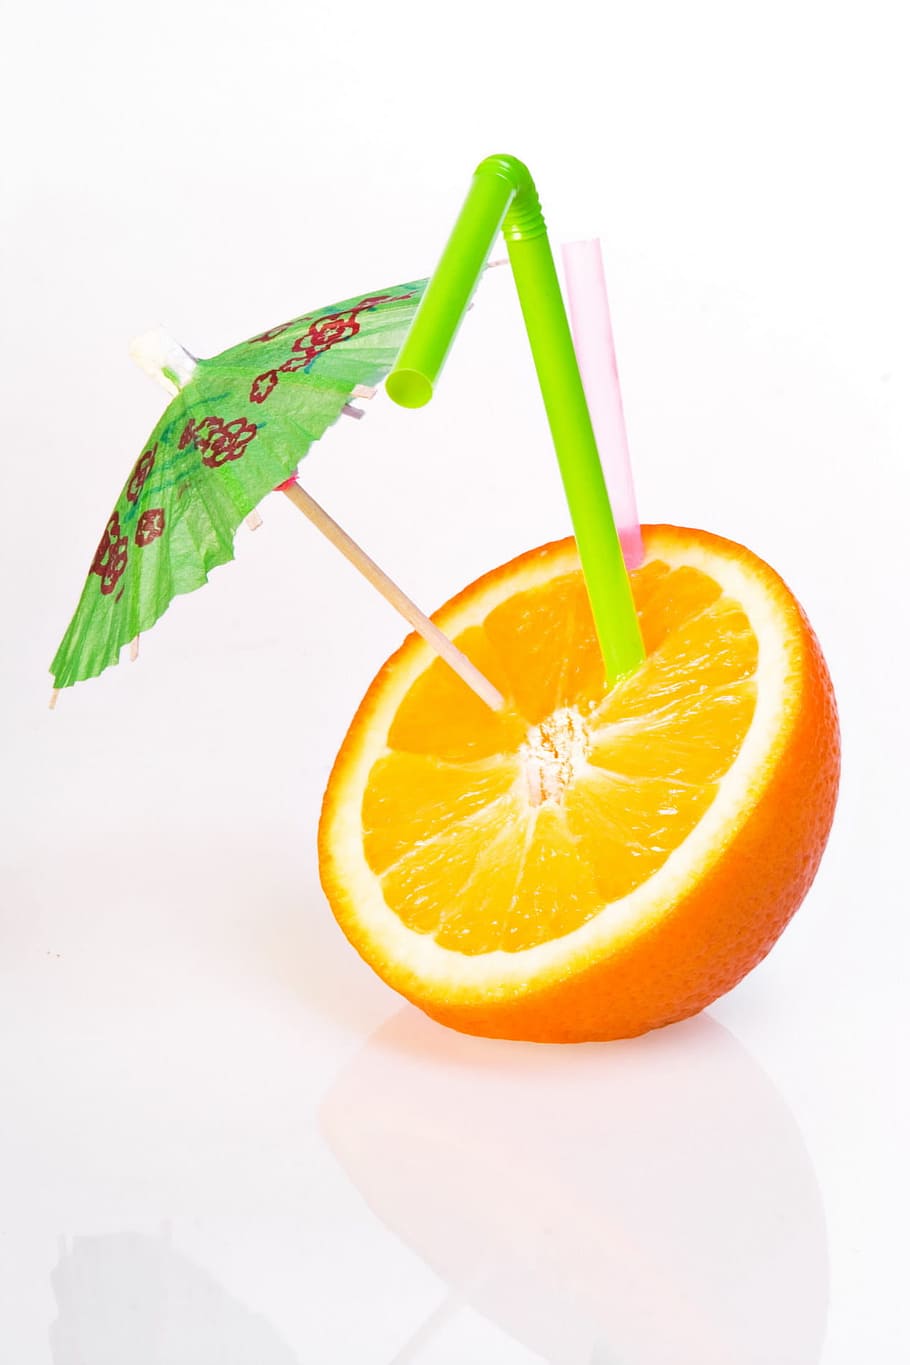 orange, fruit, isolated, citrus, close-up, cocktail, cut, eating, edible, food